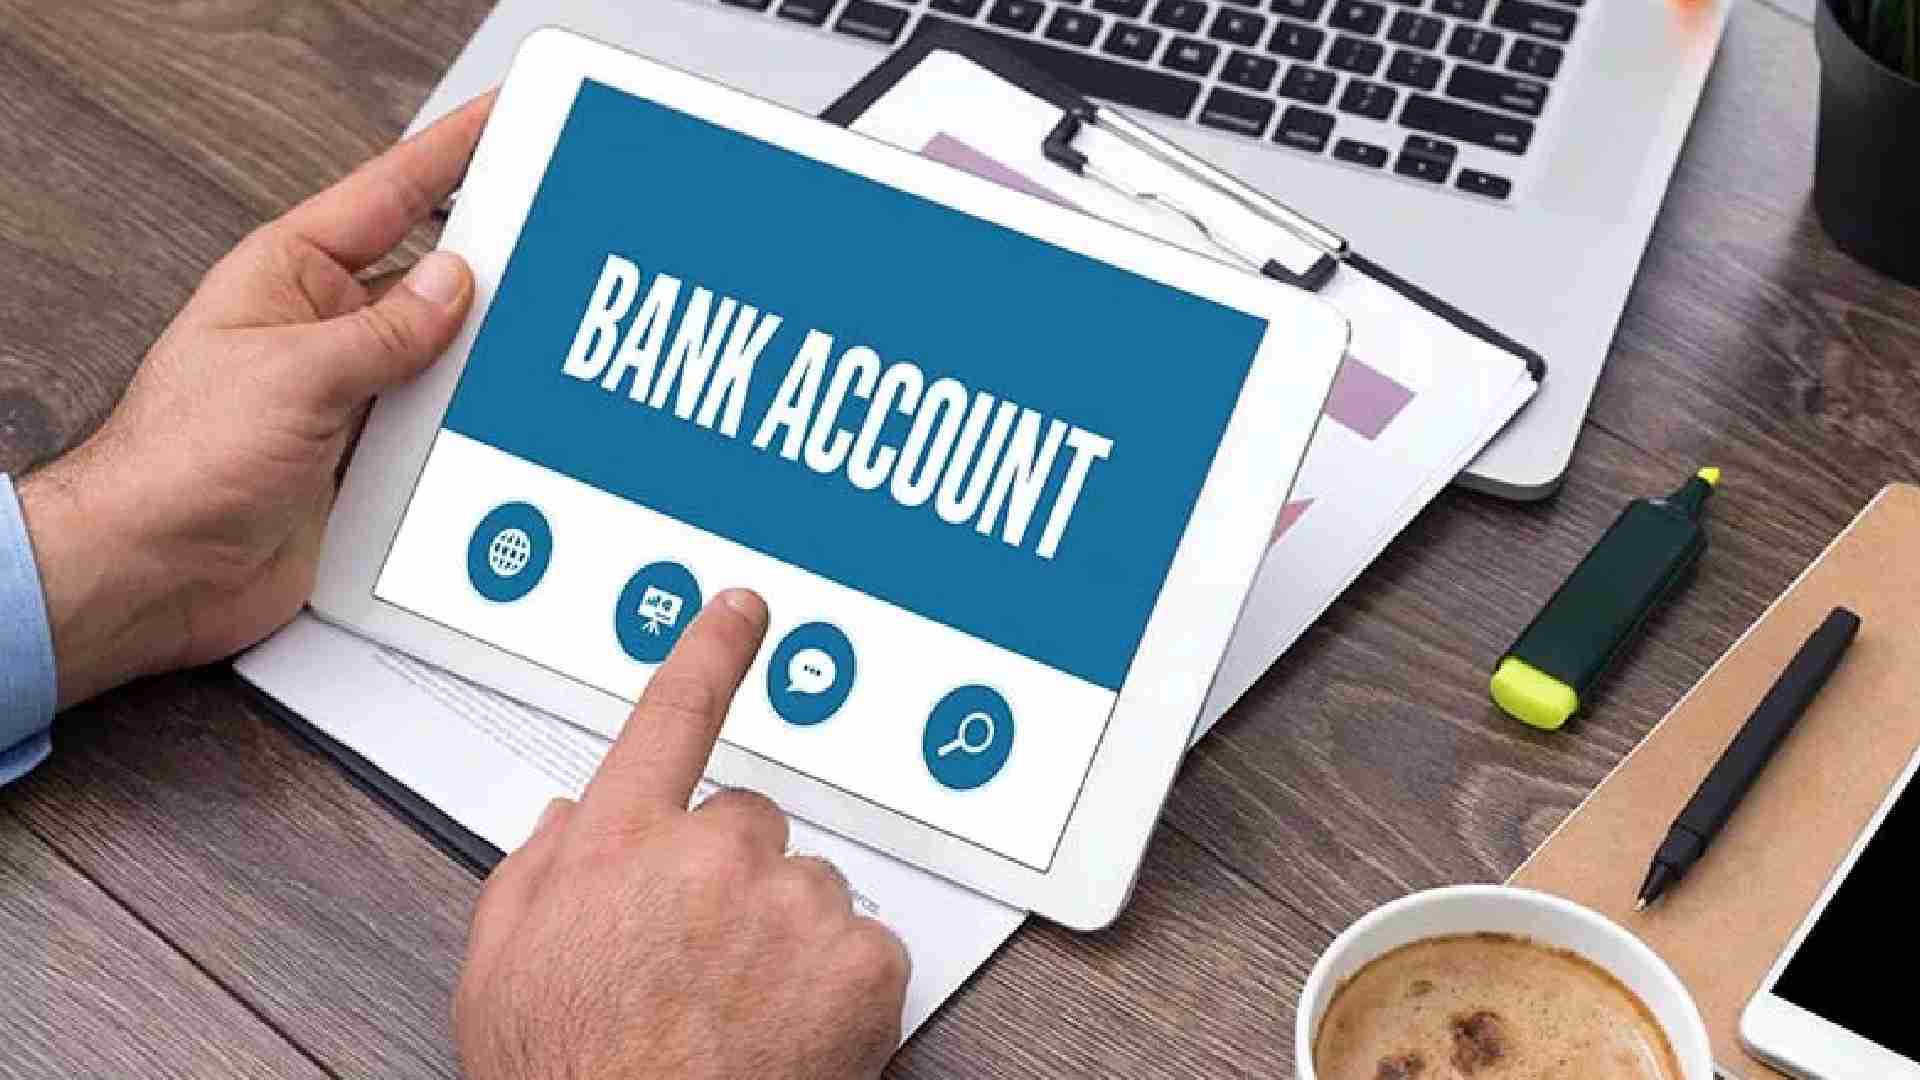 how to open bank account in uae